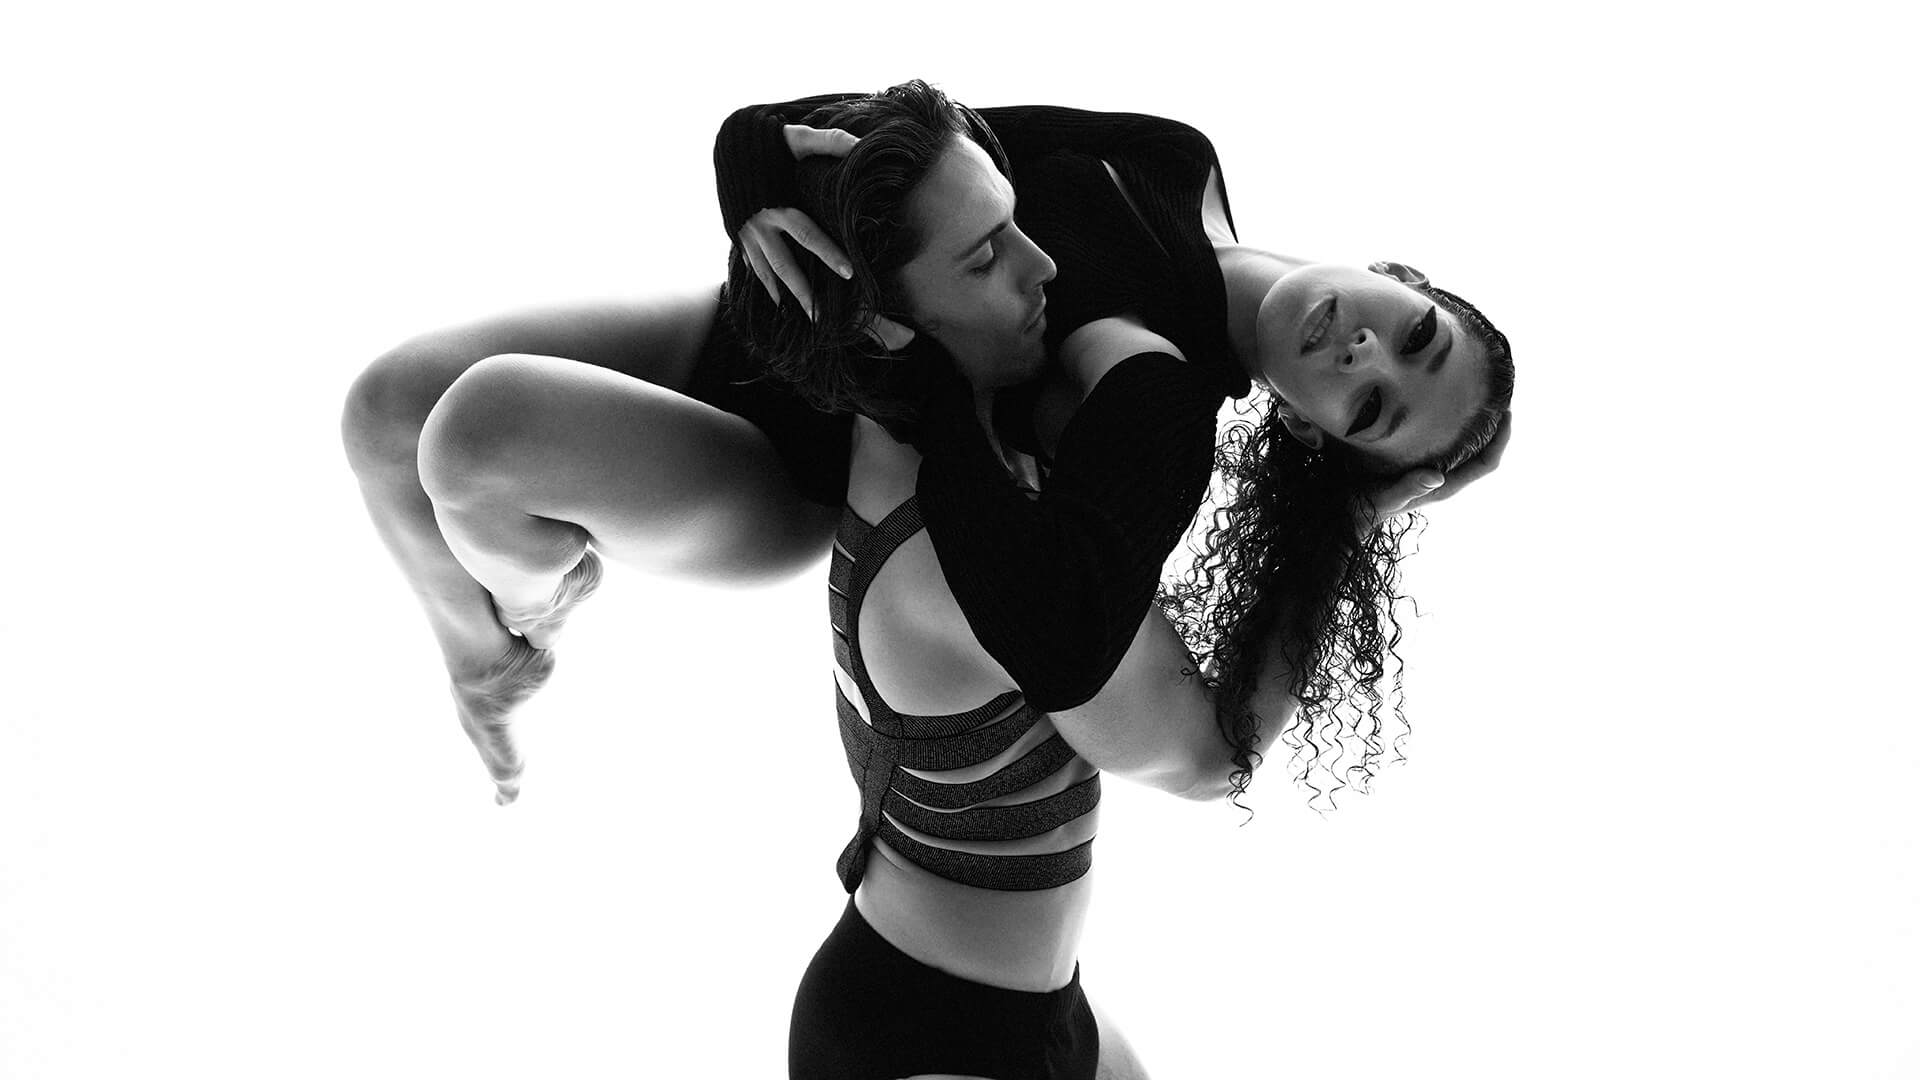 Black and white photo of a male dancer holding up a female dancer